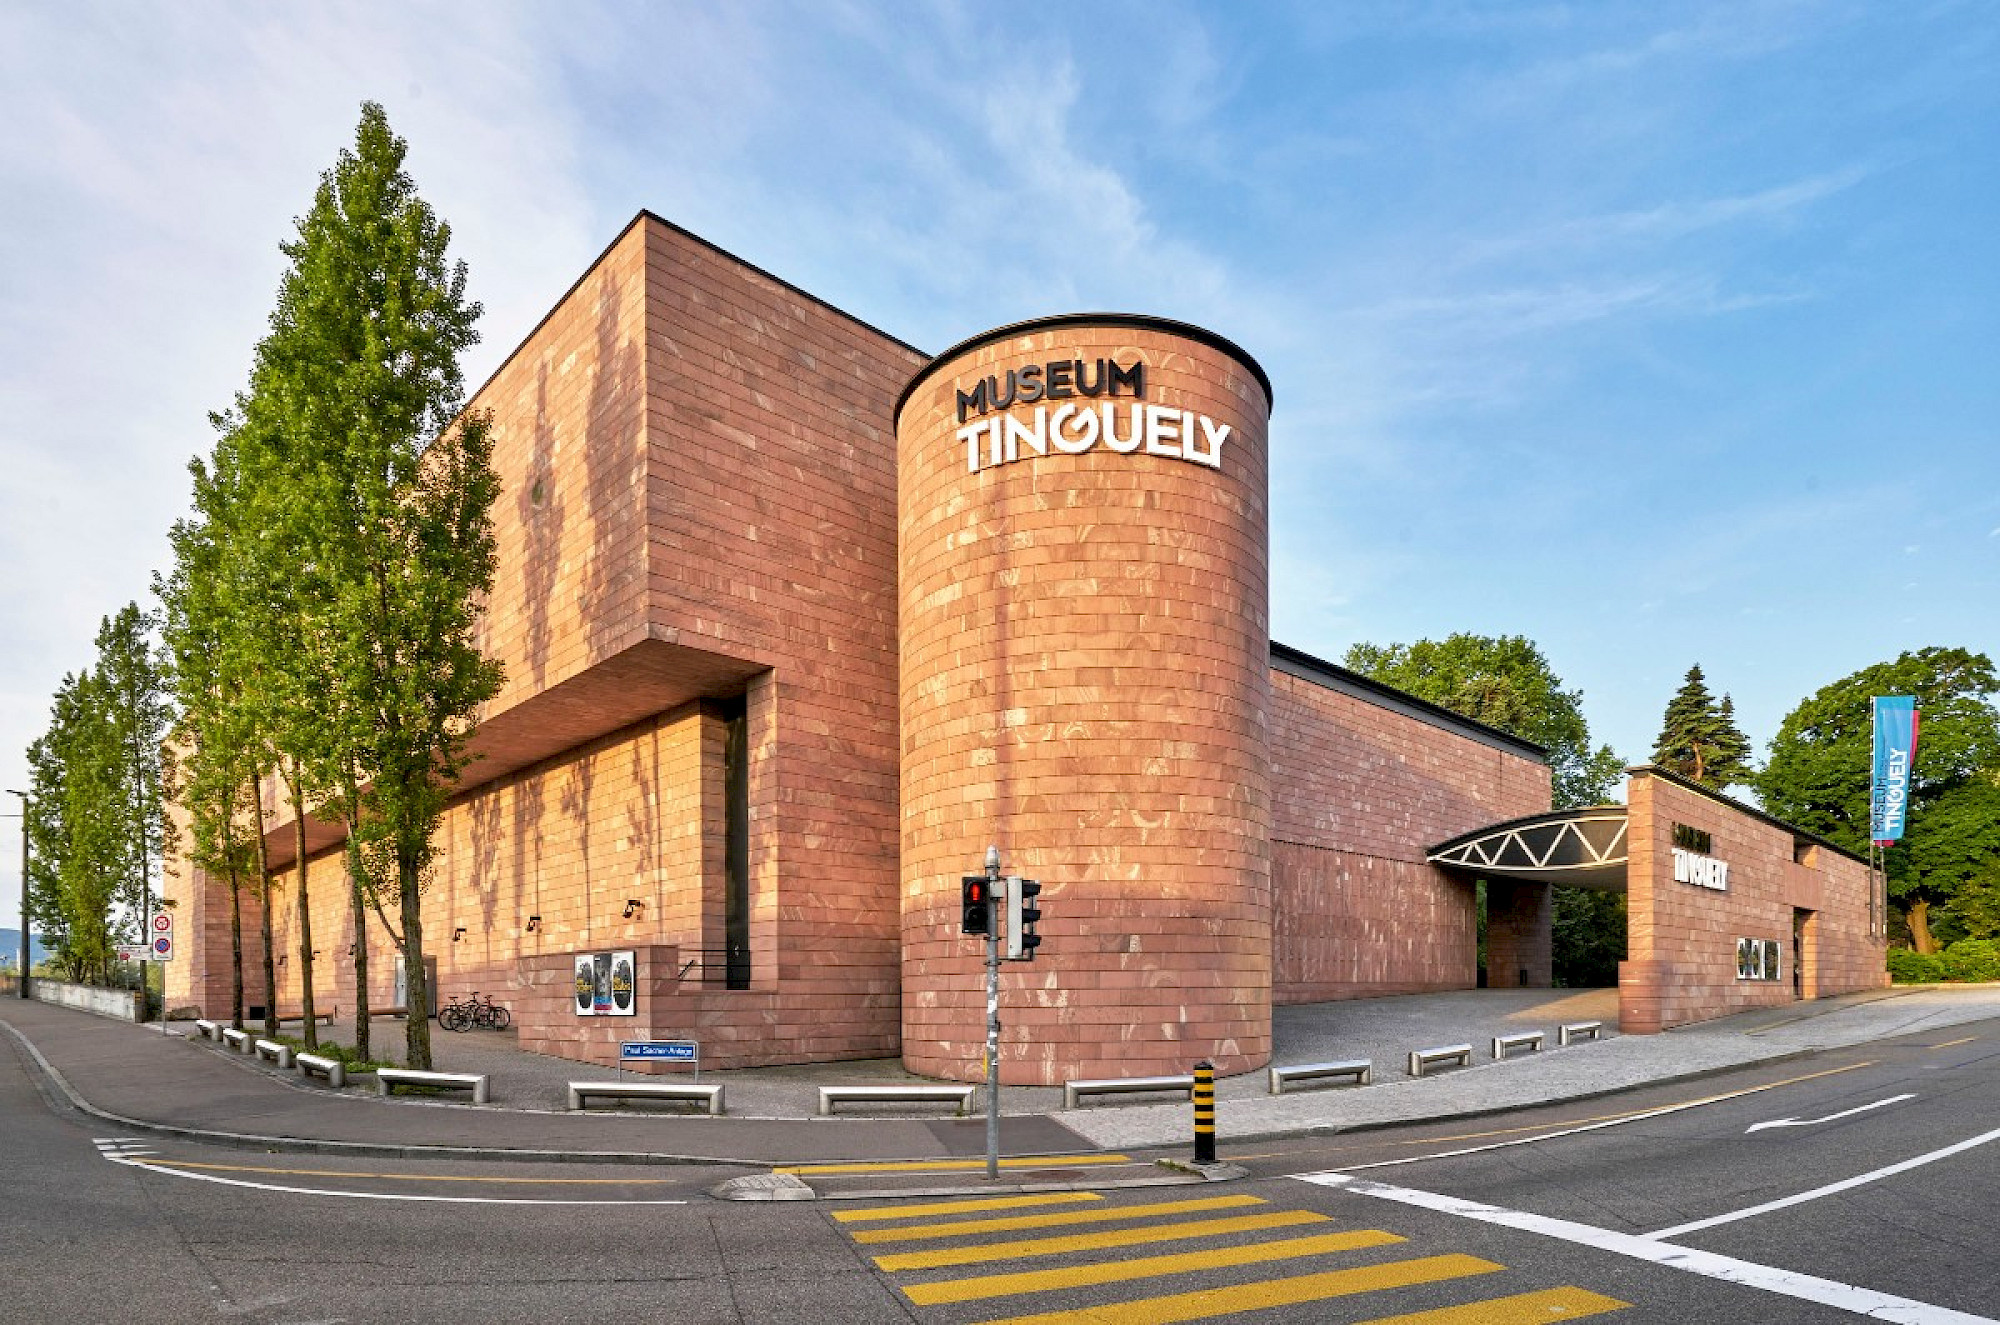 Museum Tinguely